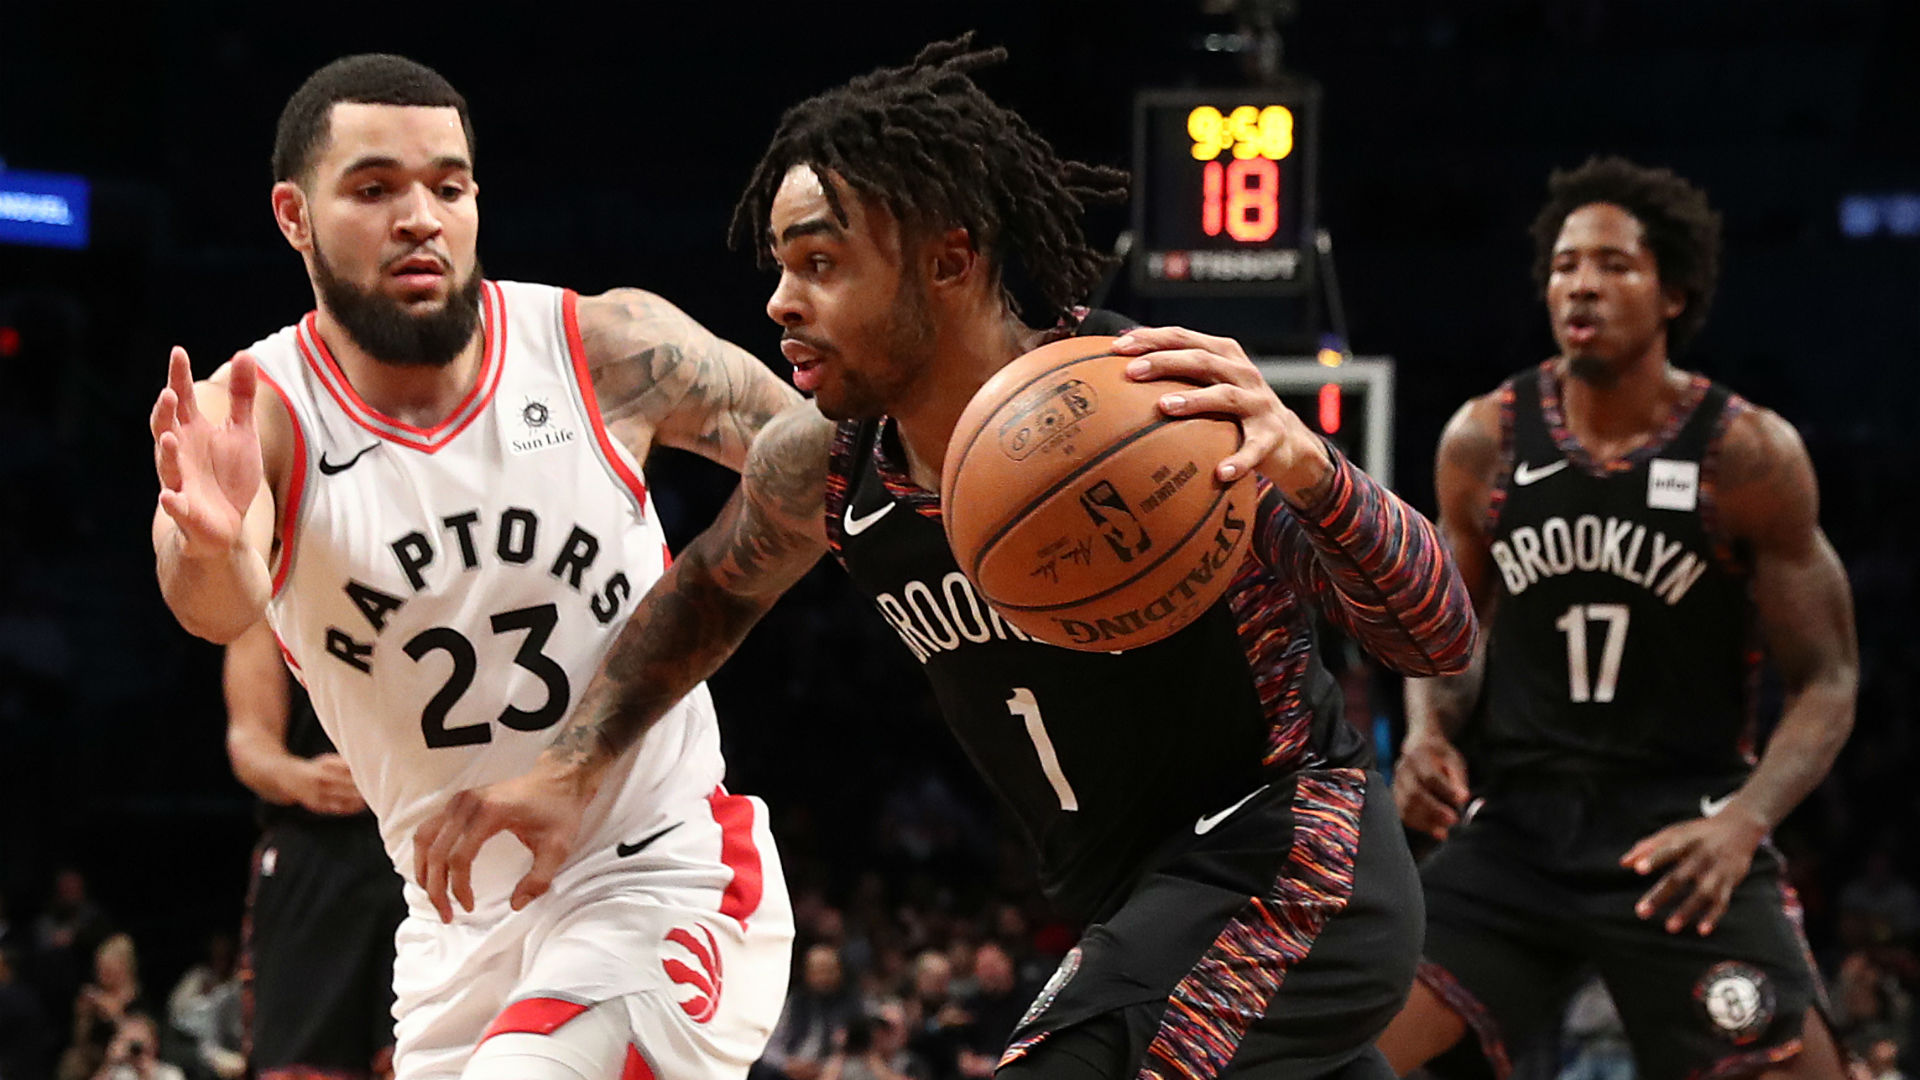 Raptors vs. Nets: Game preview, live stream, TV channel, start time | Sporting News